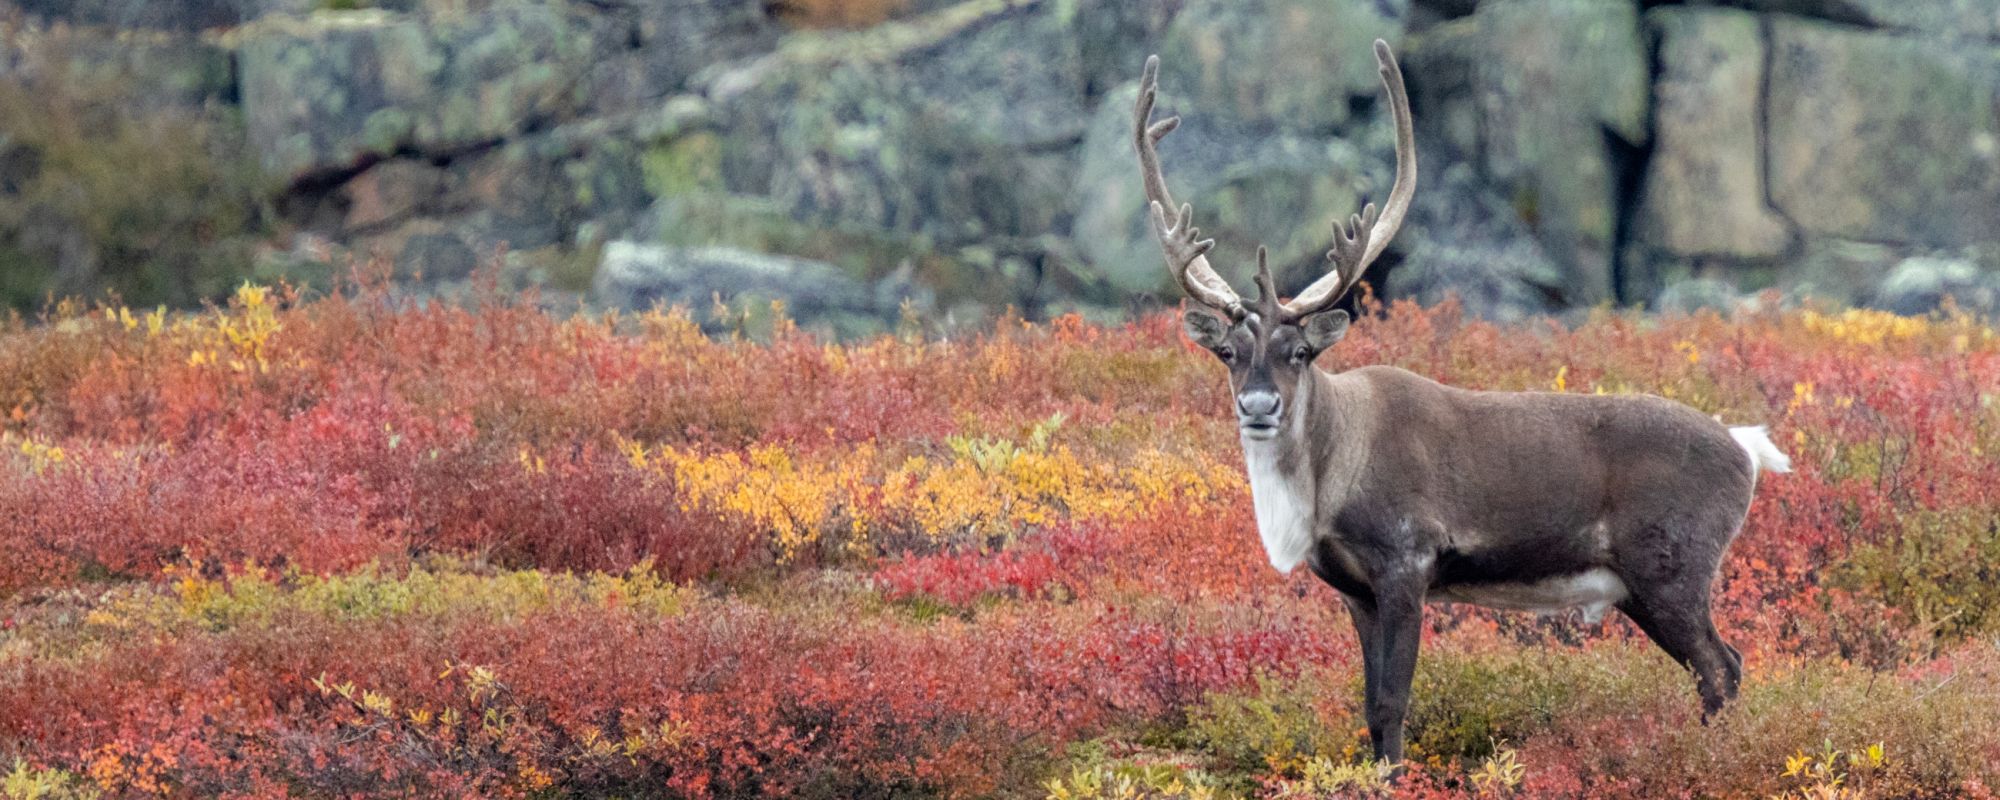 Barren ground caribou bull on the Canadian tundra blanketed in fall colors